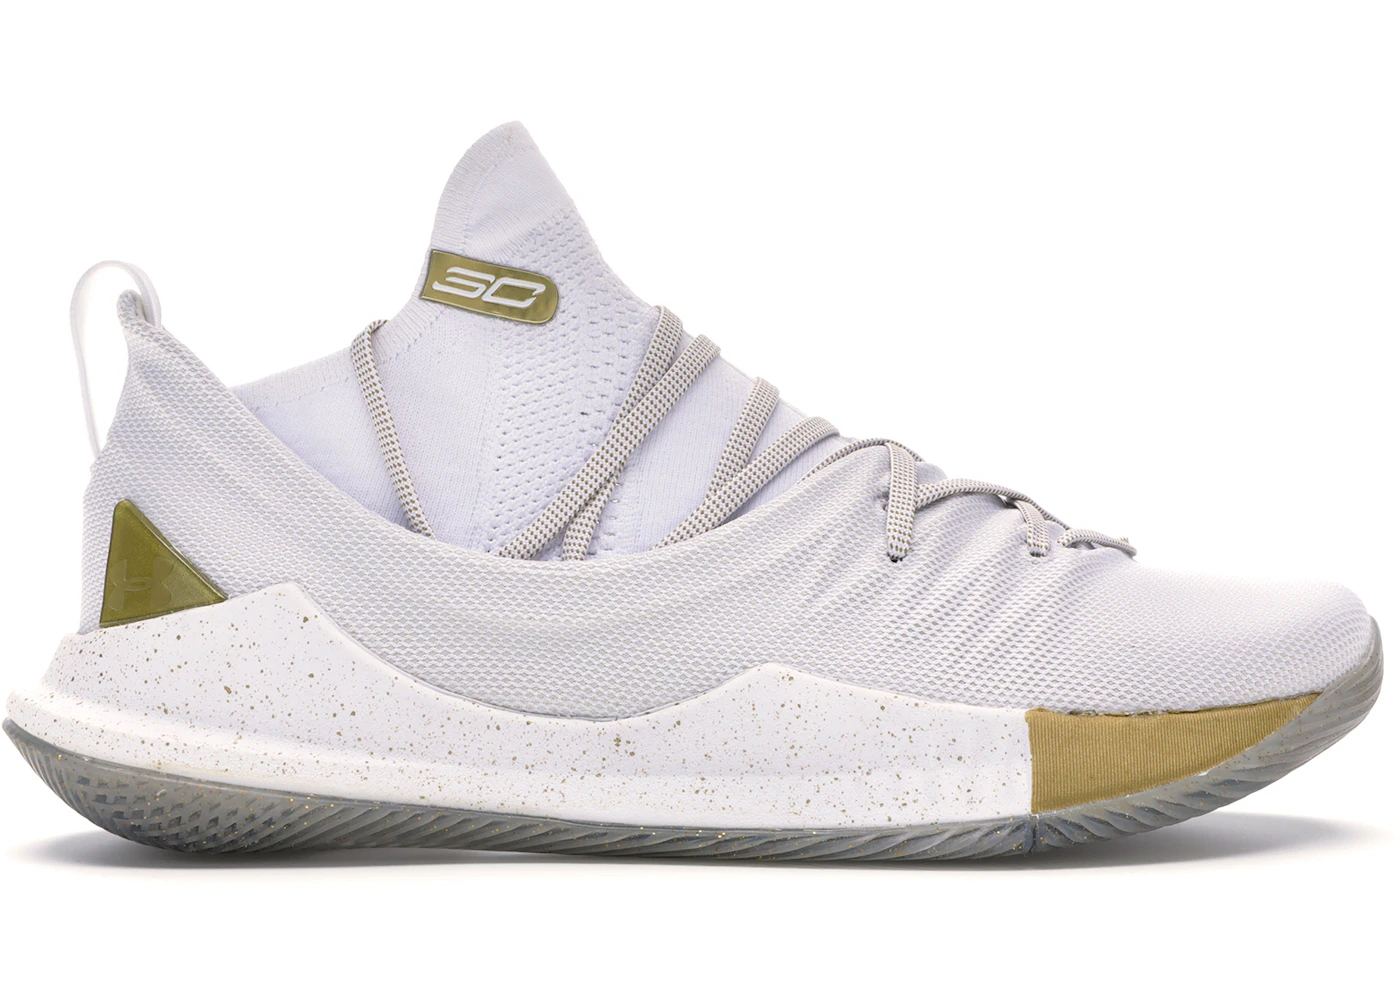 Under Armour Curry 5 White Gold Men's - 3020657-100 - US